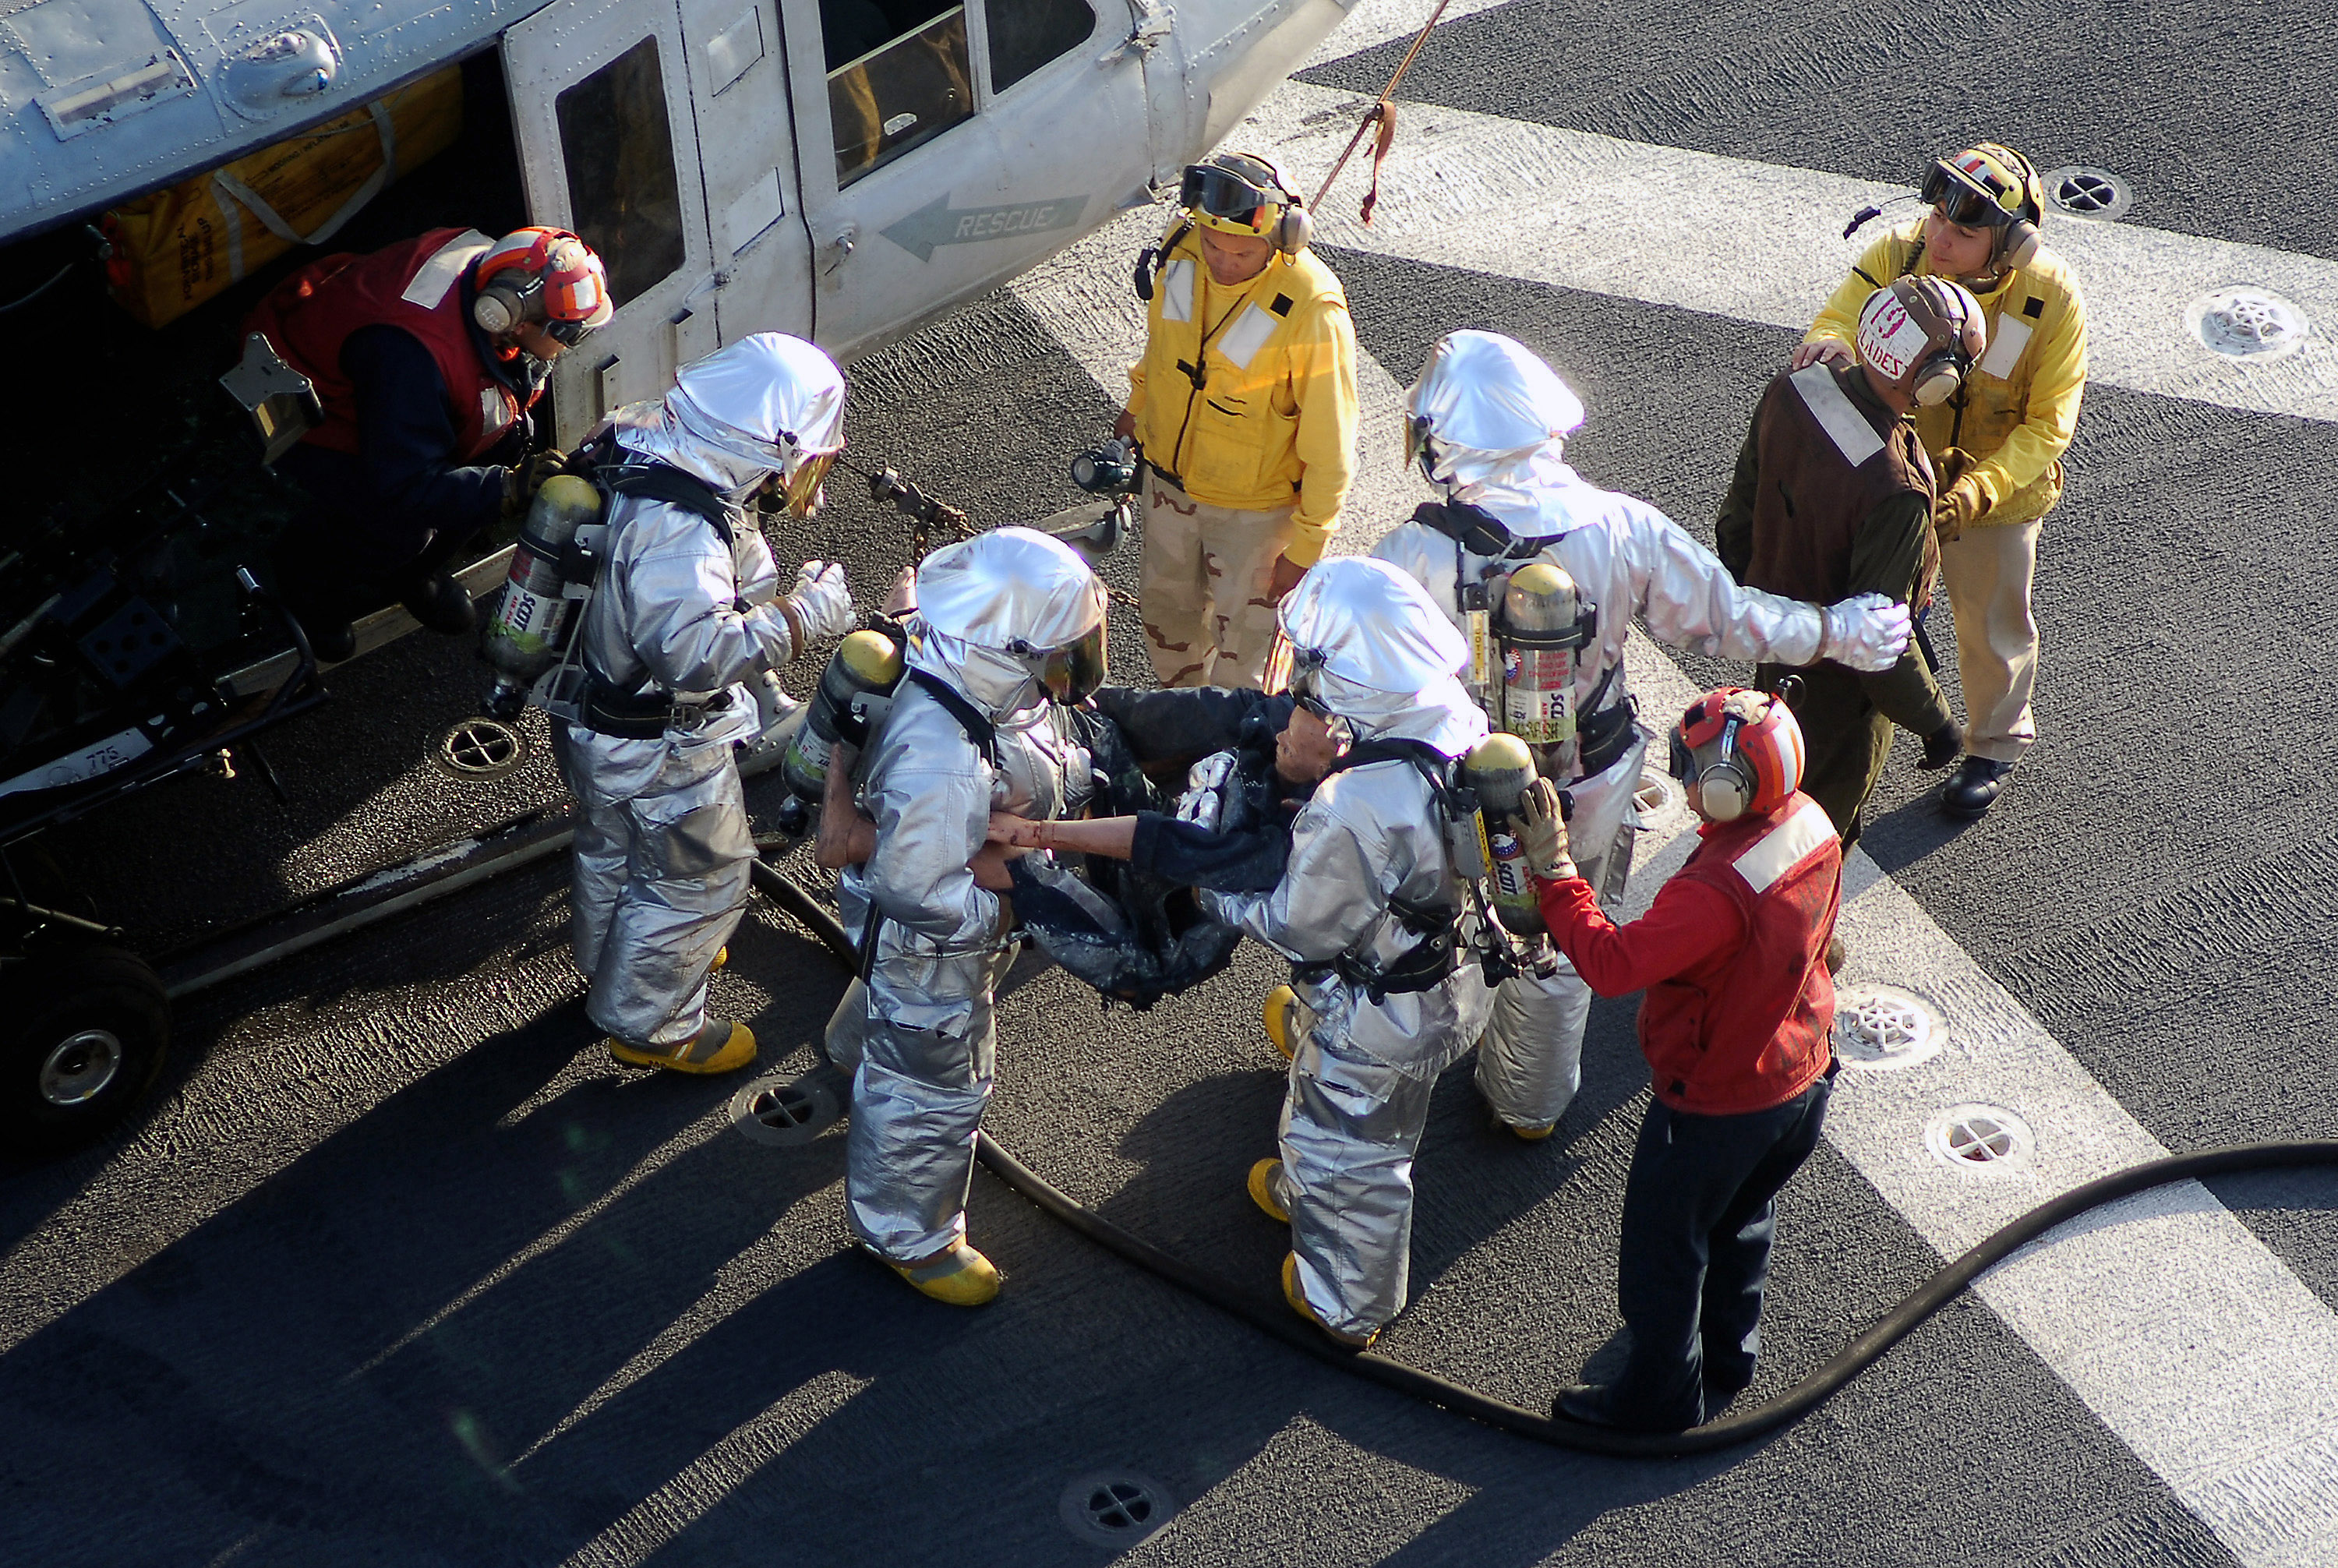 US Navy 070918-N-4774B-159 The crash and salvage team aboard amphibious assault ship USS Tarawa (LHA 1) trains for handling an emergency helicopter landing and rescue of wounded personnel